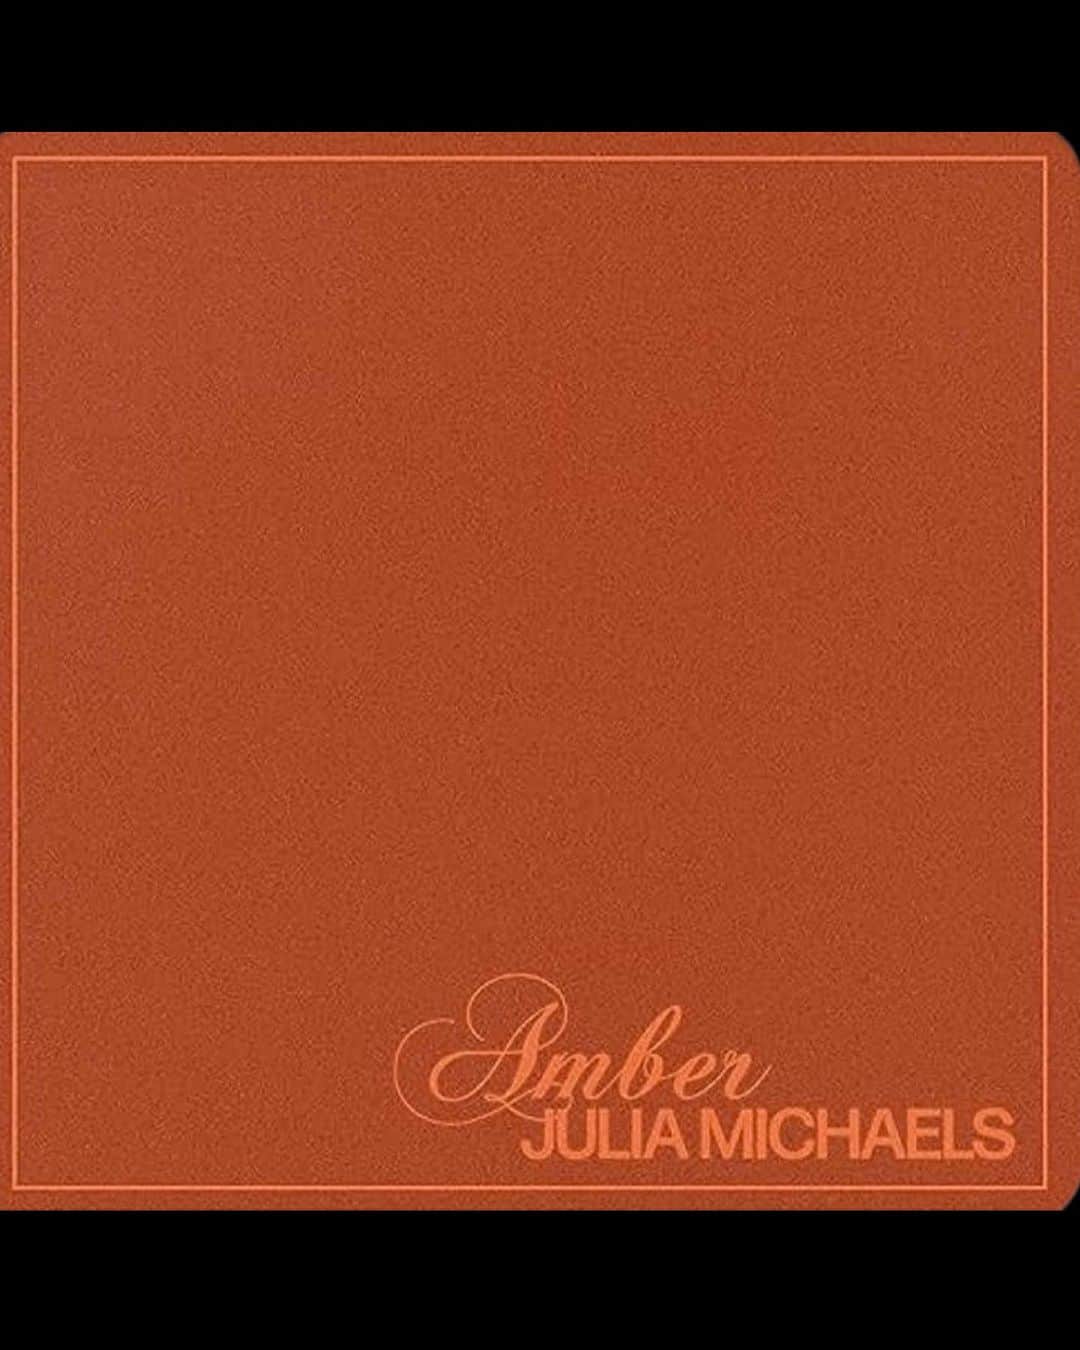 Julia Michaelsのインスタグラム：「Surprise! I know it’s been a while since I’ve put out something new, so In the meantime I made these eps for my incredible gems (and named each one after y’all) each one encapsulates feelings that feel like the color of these gems. It’s had me in so many of my feels, reminiscing on so many amazing memories I’ve made with you all. Be on the look out for more of them coming soon :) ❤️」